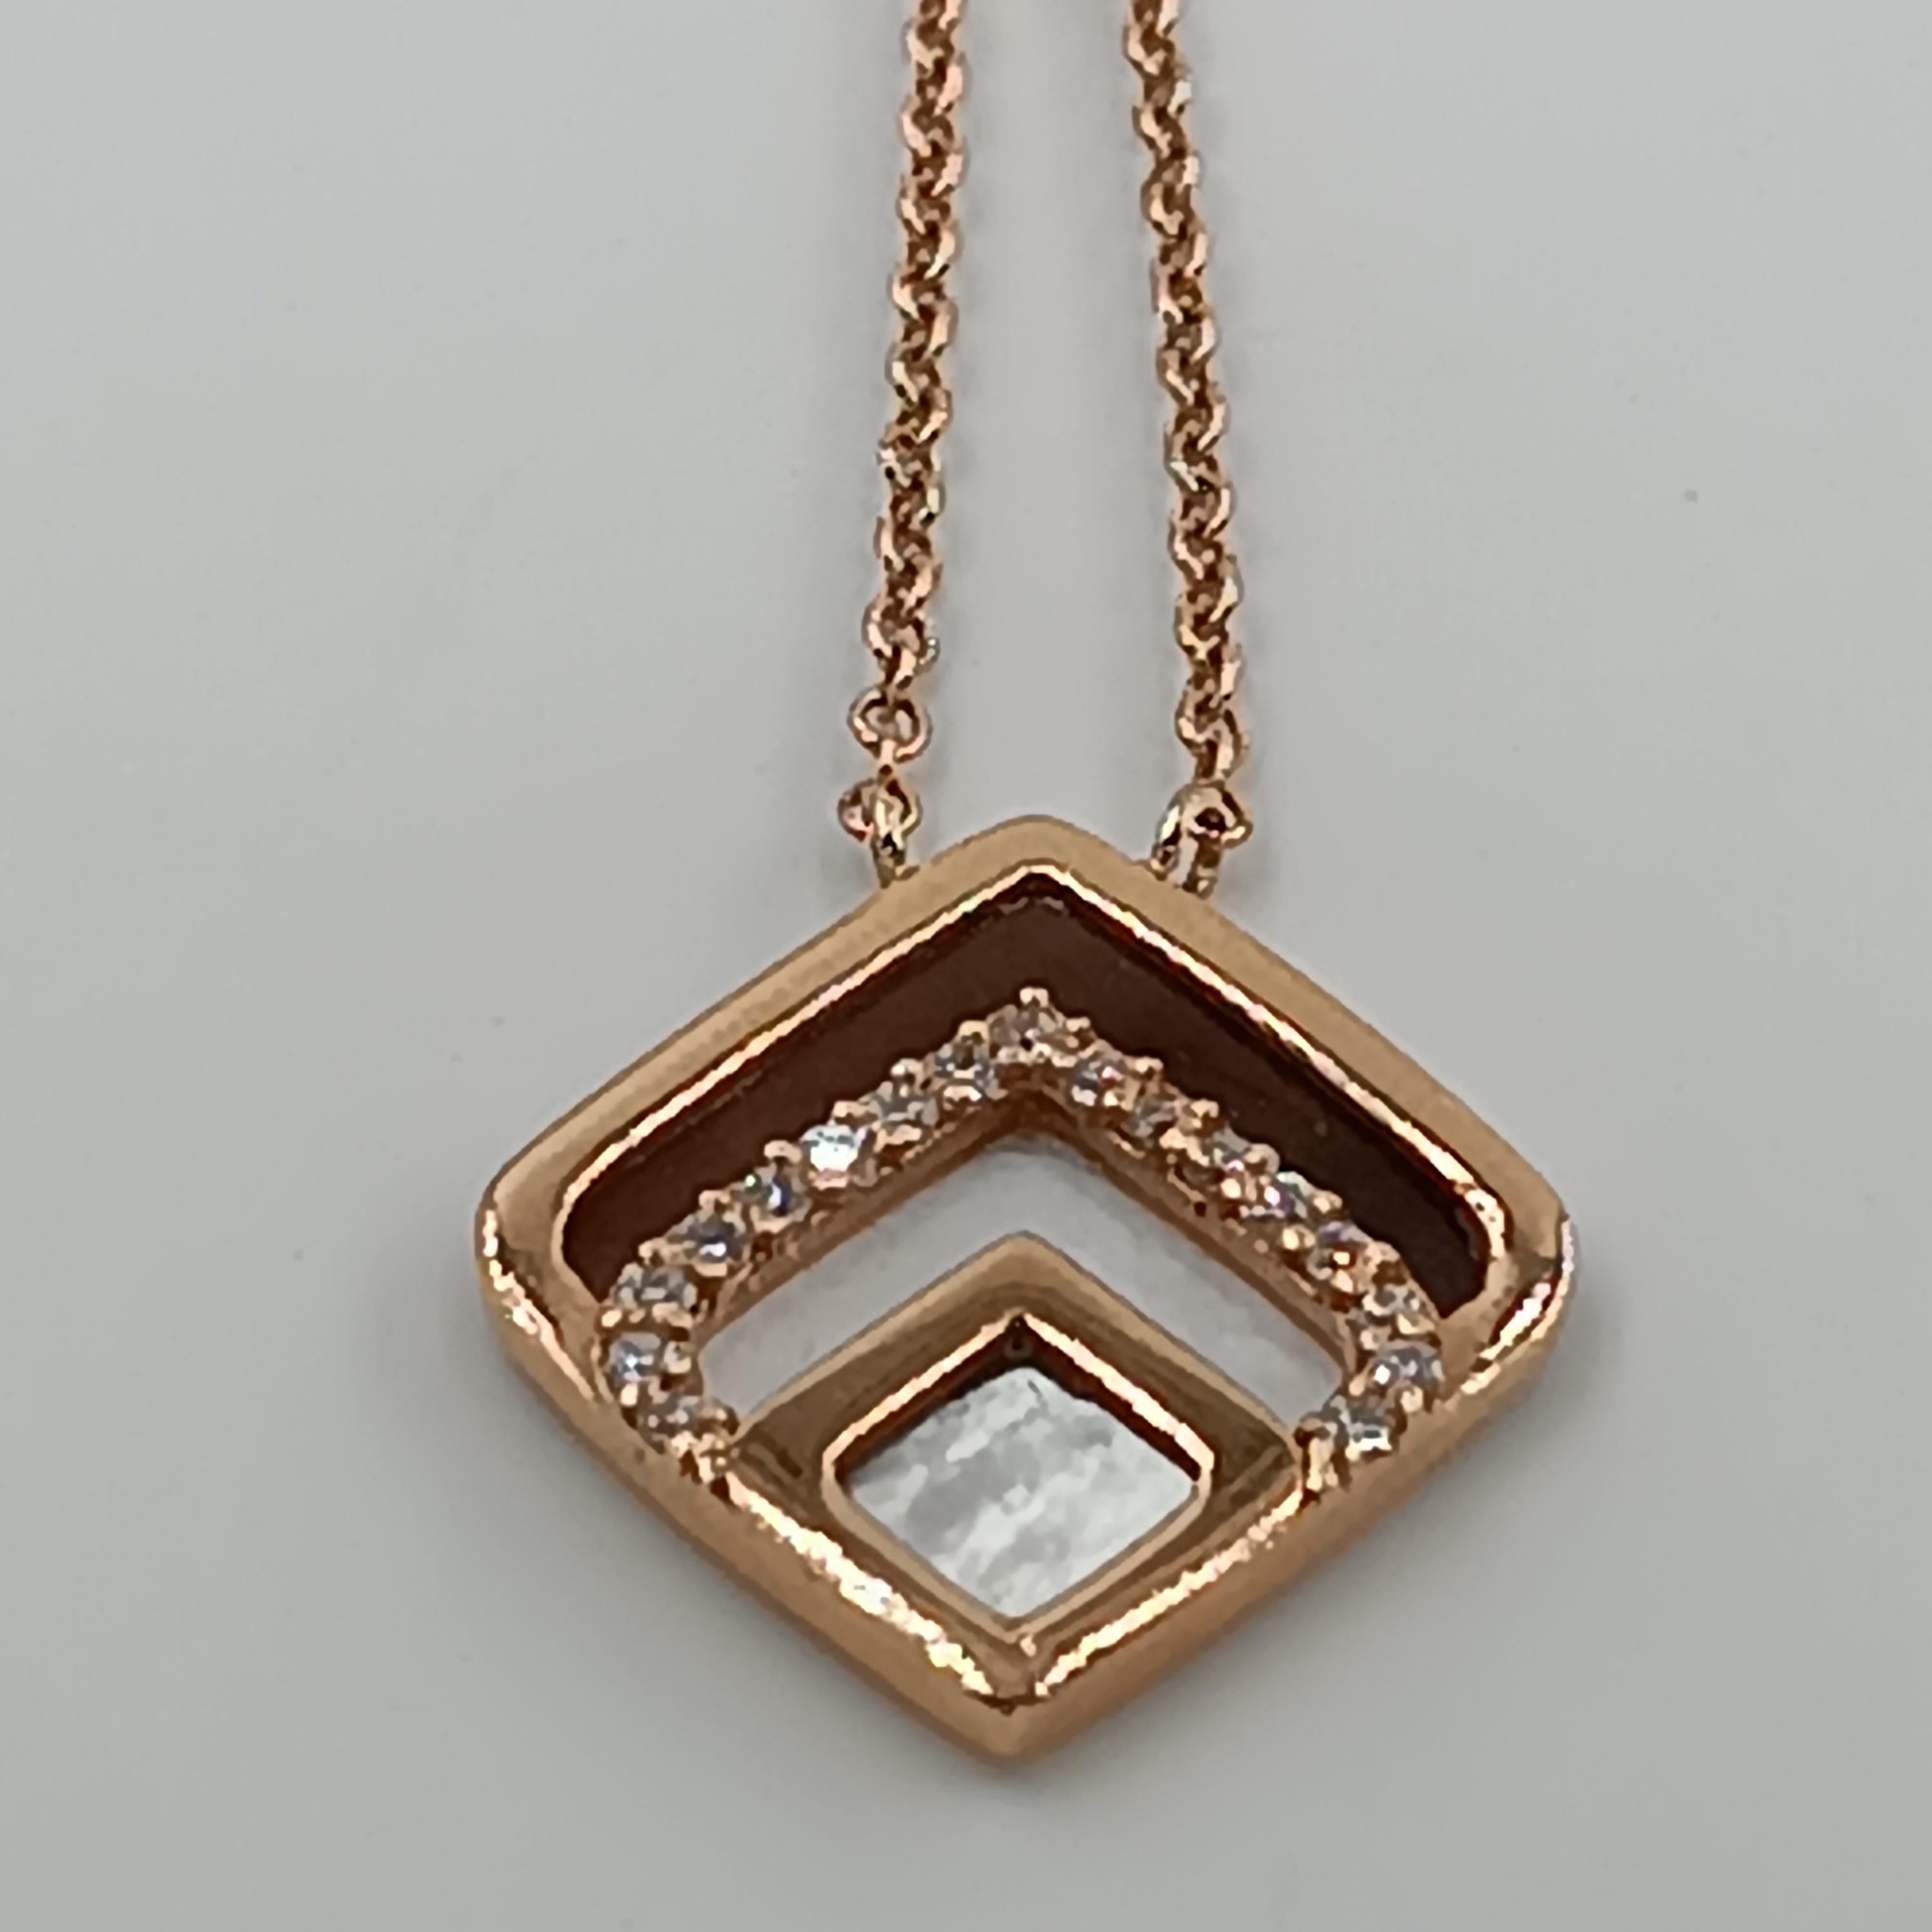 This wonderful Leo Milano pendant from our Verri  collection shows in every detail a very complicate yet perfectly done workmanship. The pendant and the chain are in 18 carat rose gold with mother of pearl . The object weights 4.83 grams the total